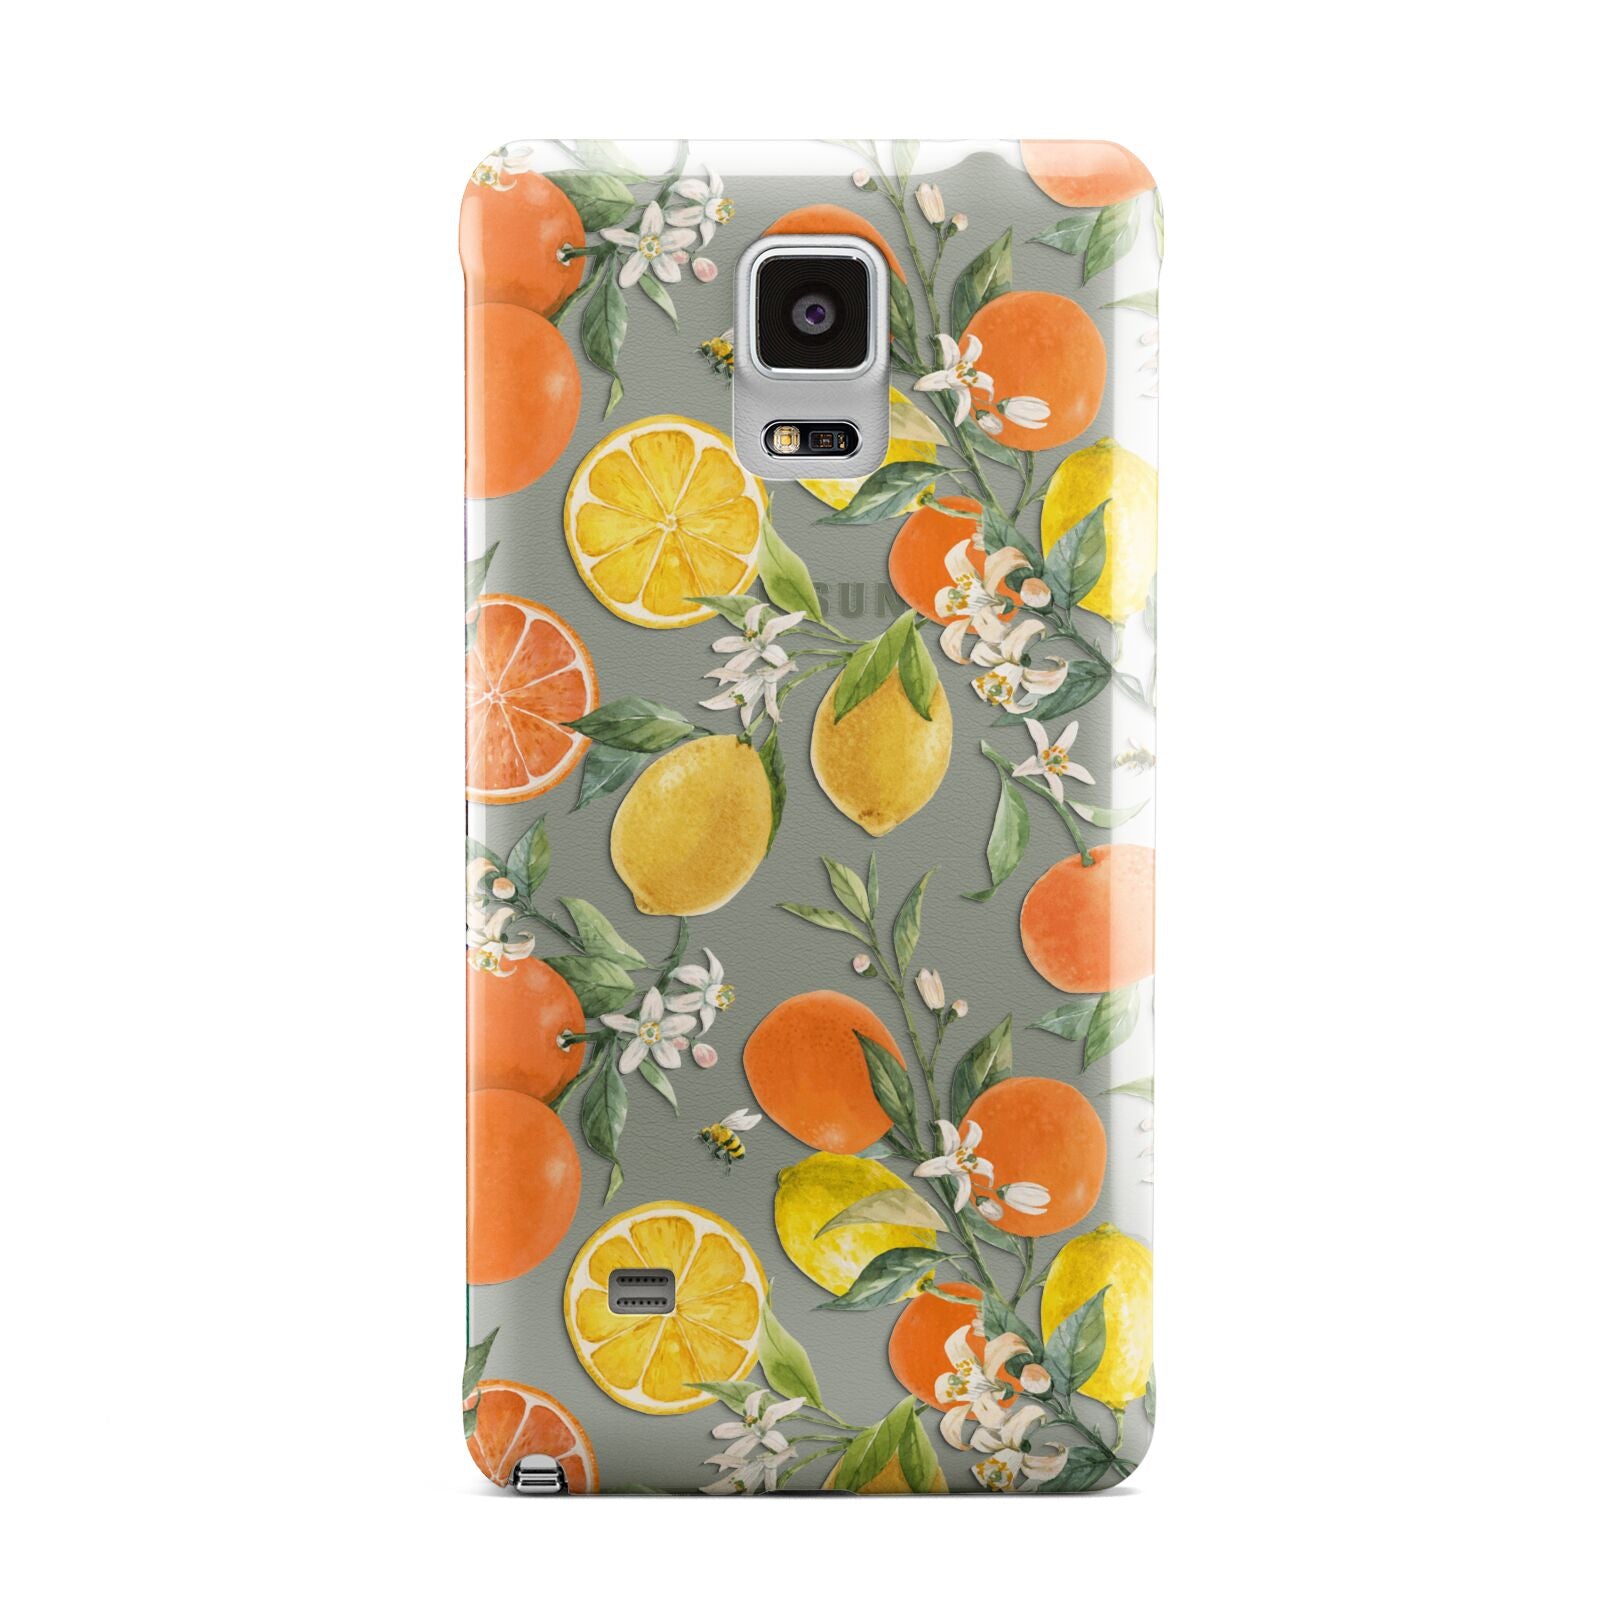 Lemons and Oranges Samsung Galaxy Note 4 Case